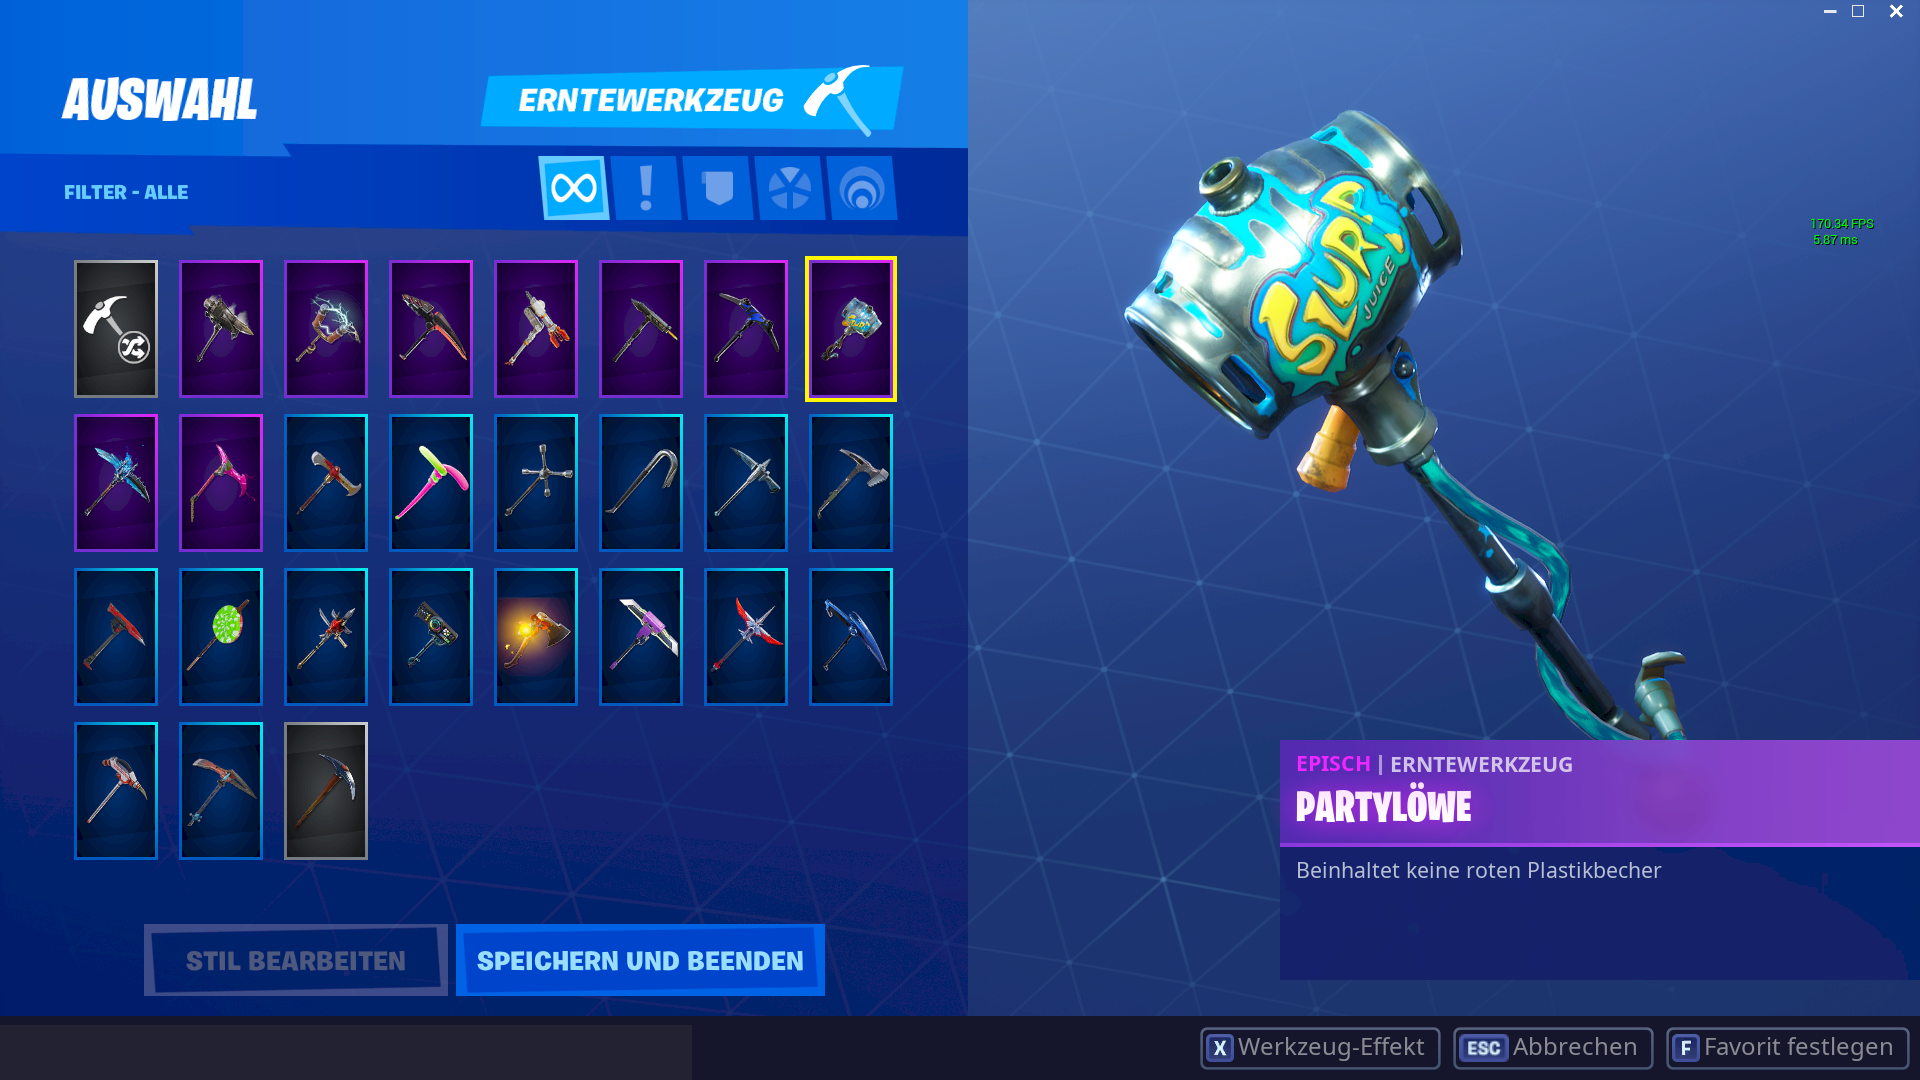 Does my fortnite account worth If yes, how much please in Euro - 4